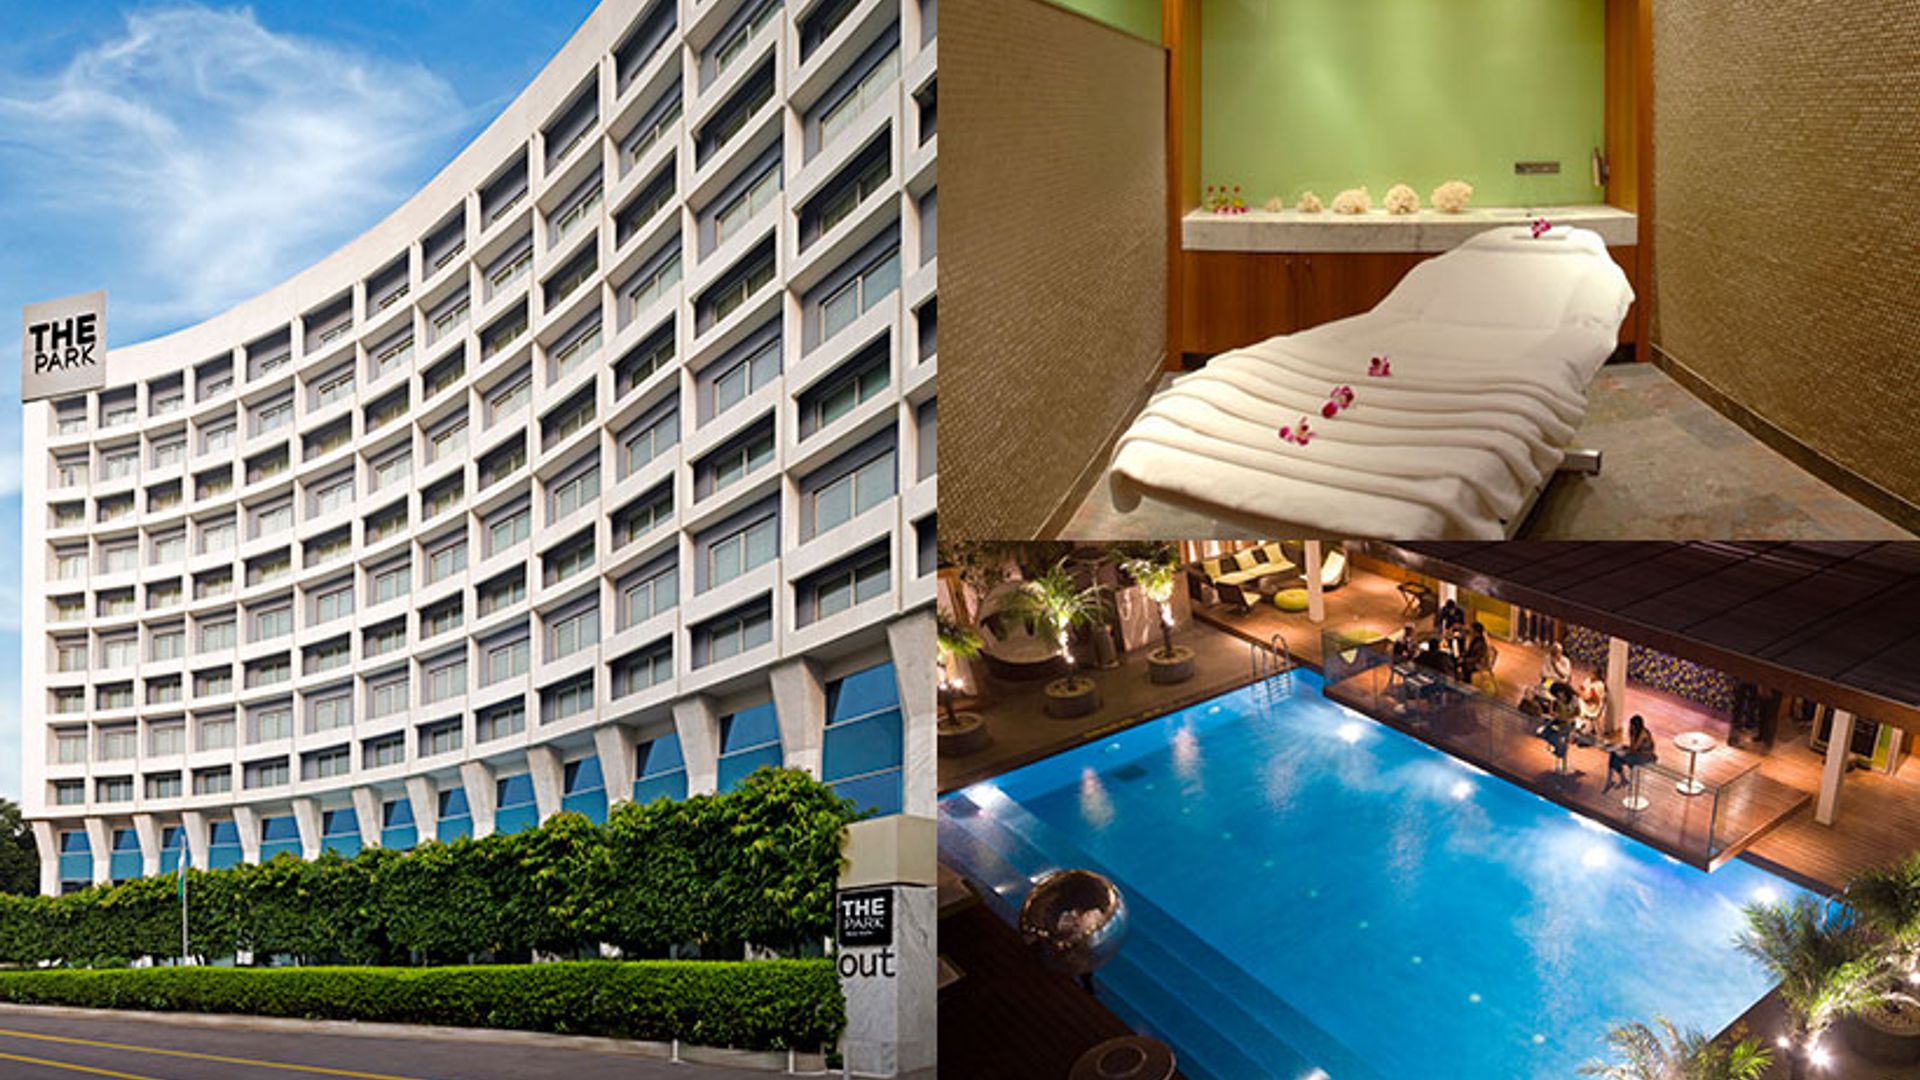 THE Park New Delhi hotel review: India's five-star resort that’s anything but ordinary